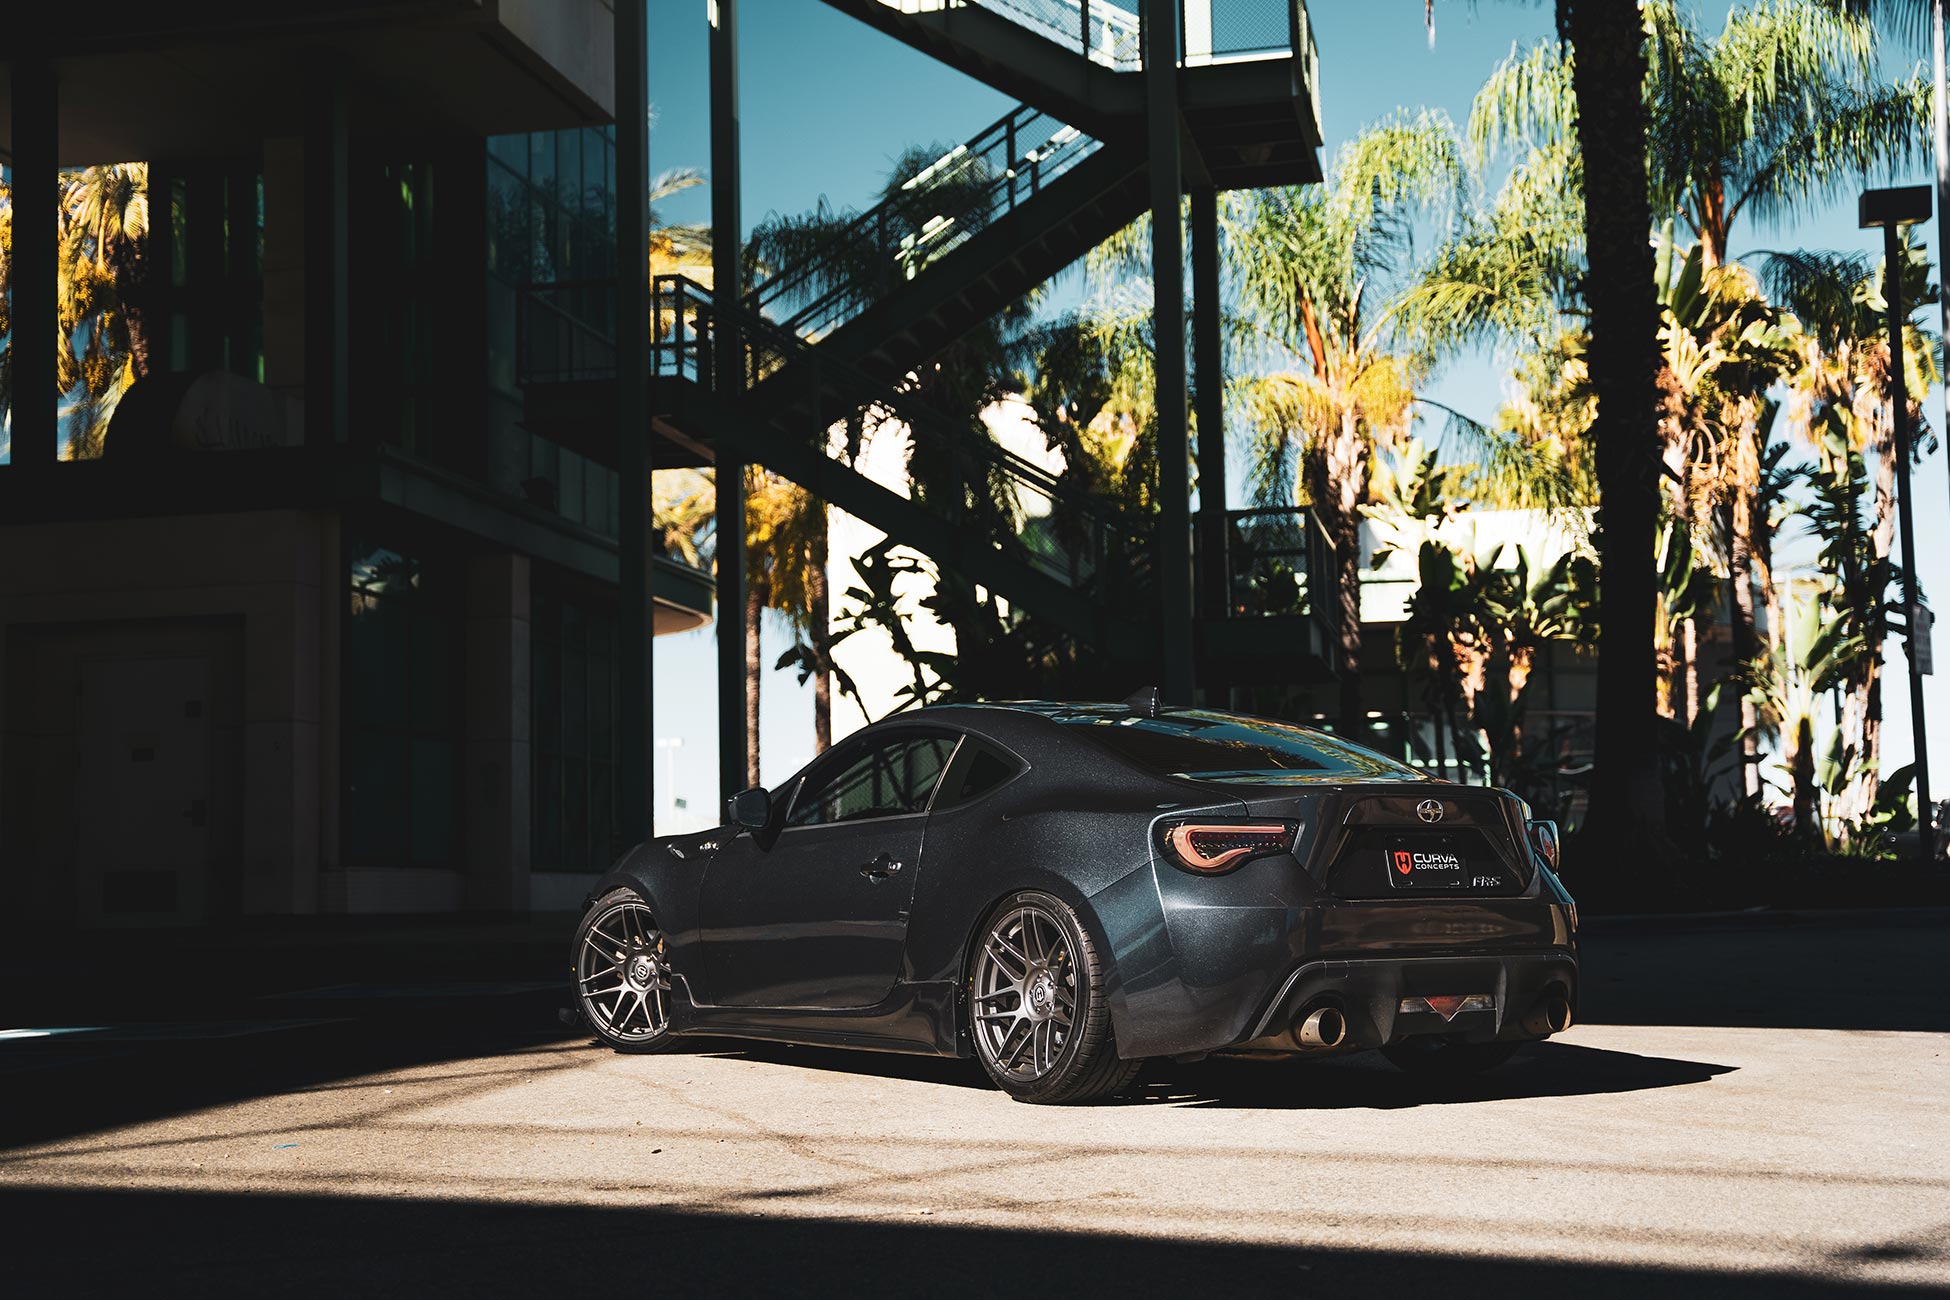 18 Inch Flow Forged CFF300 on a Scion FRS